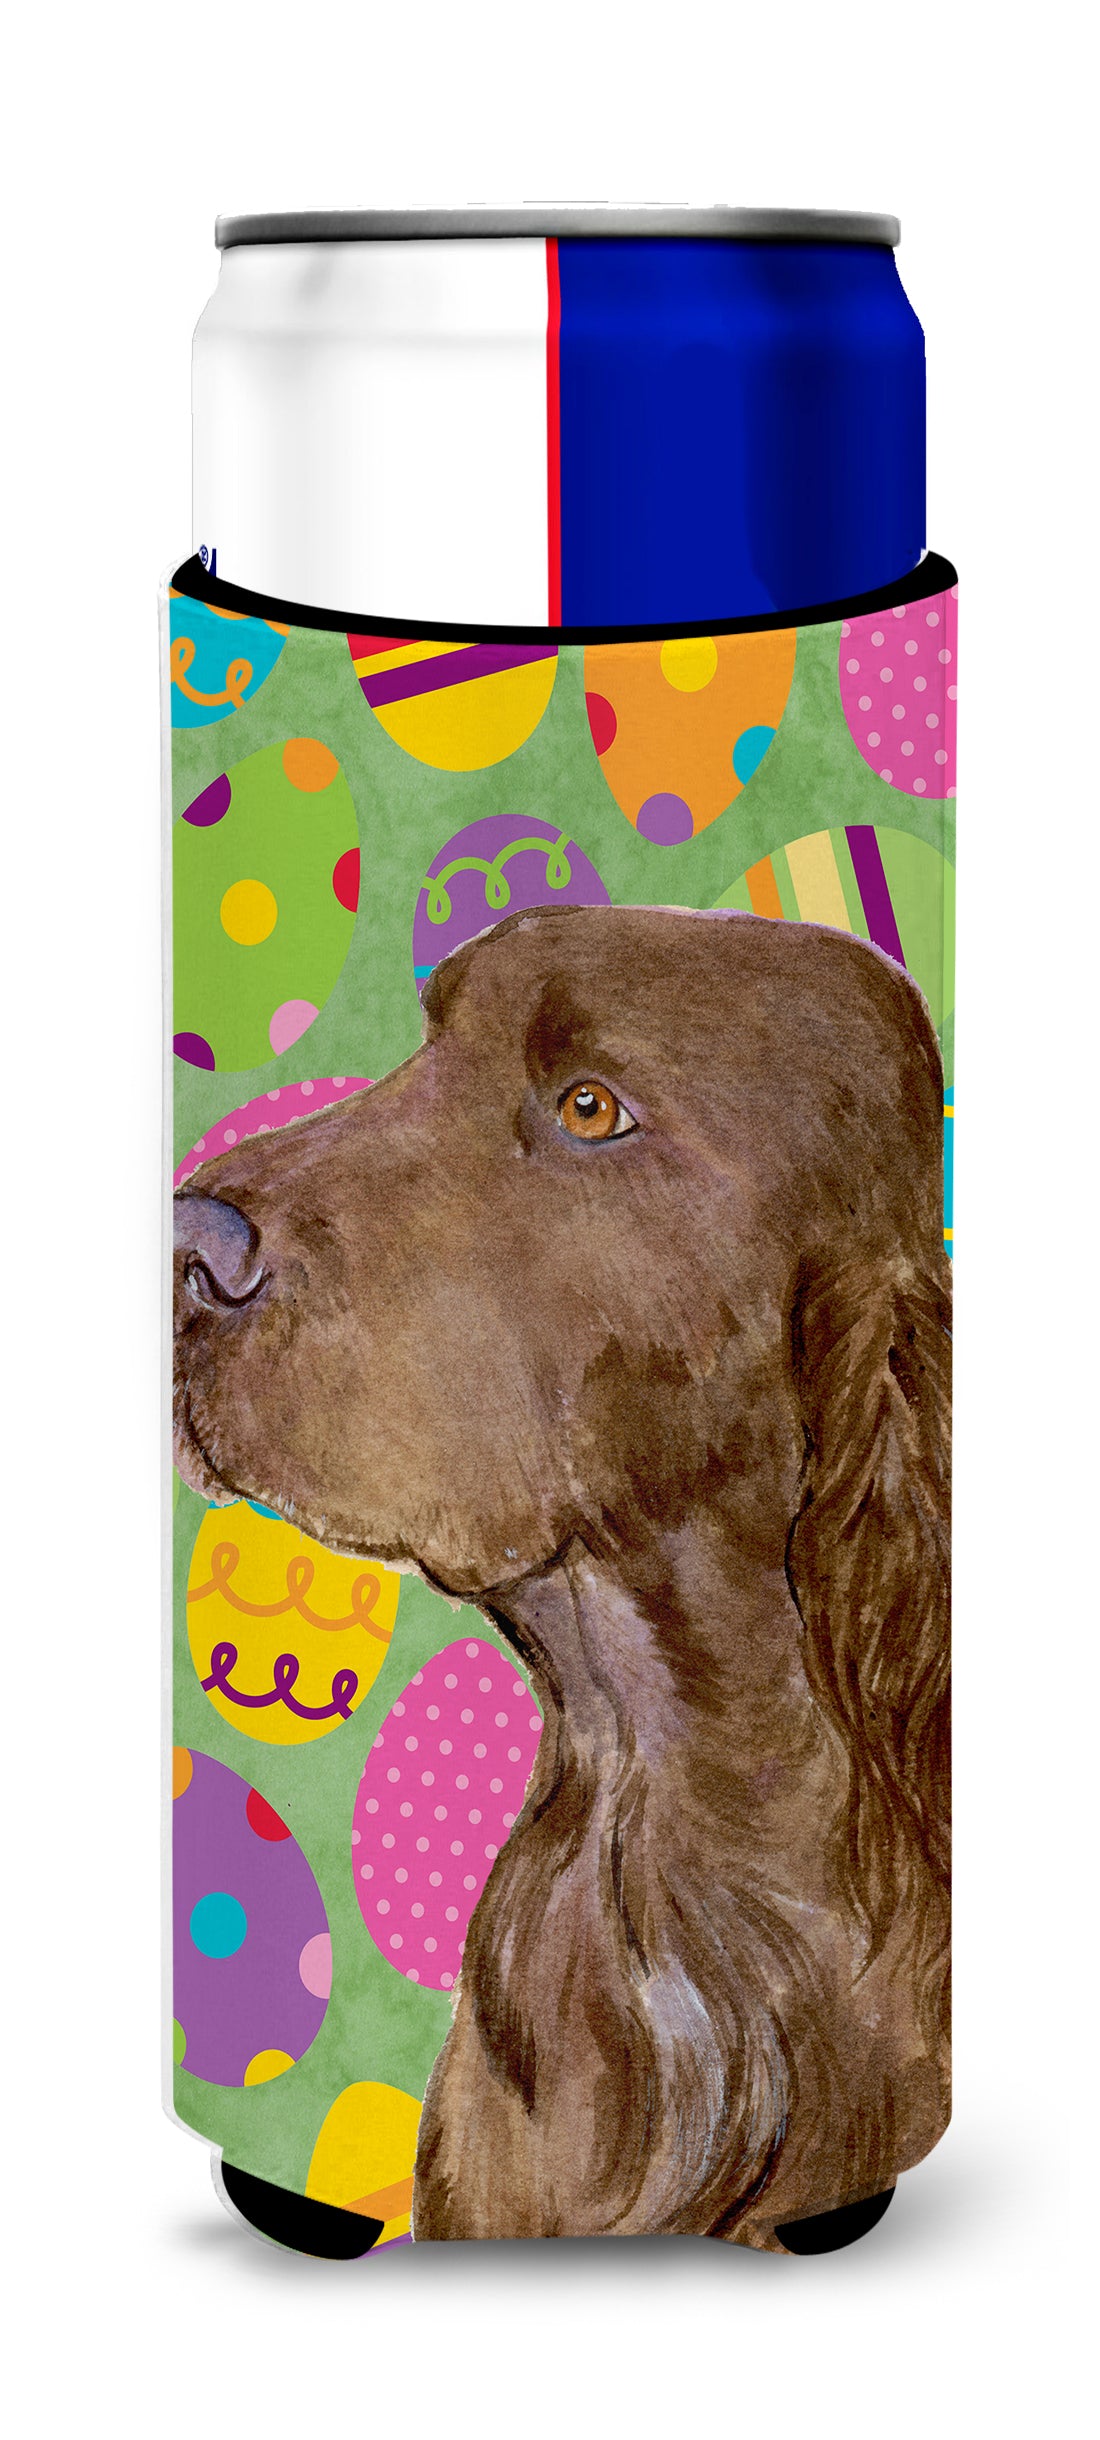 Field Spaniel Easter Eggtravaganza Ultra Beverage Insulators for slim cans SS4870MUK.